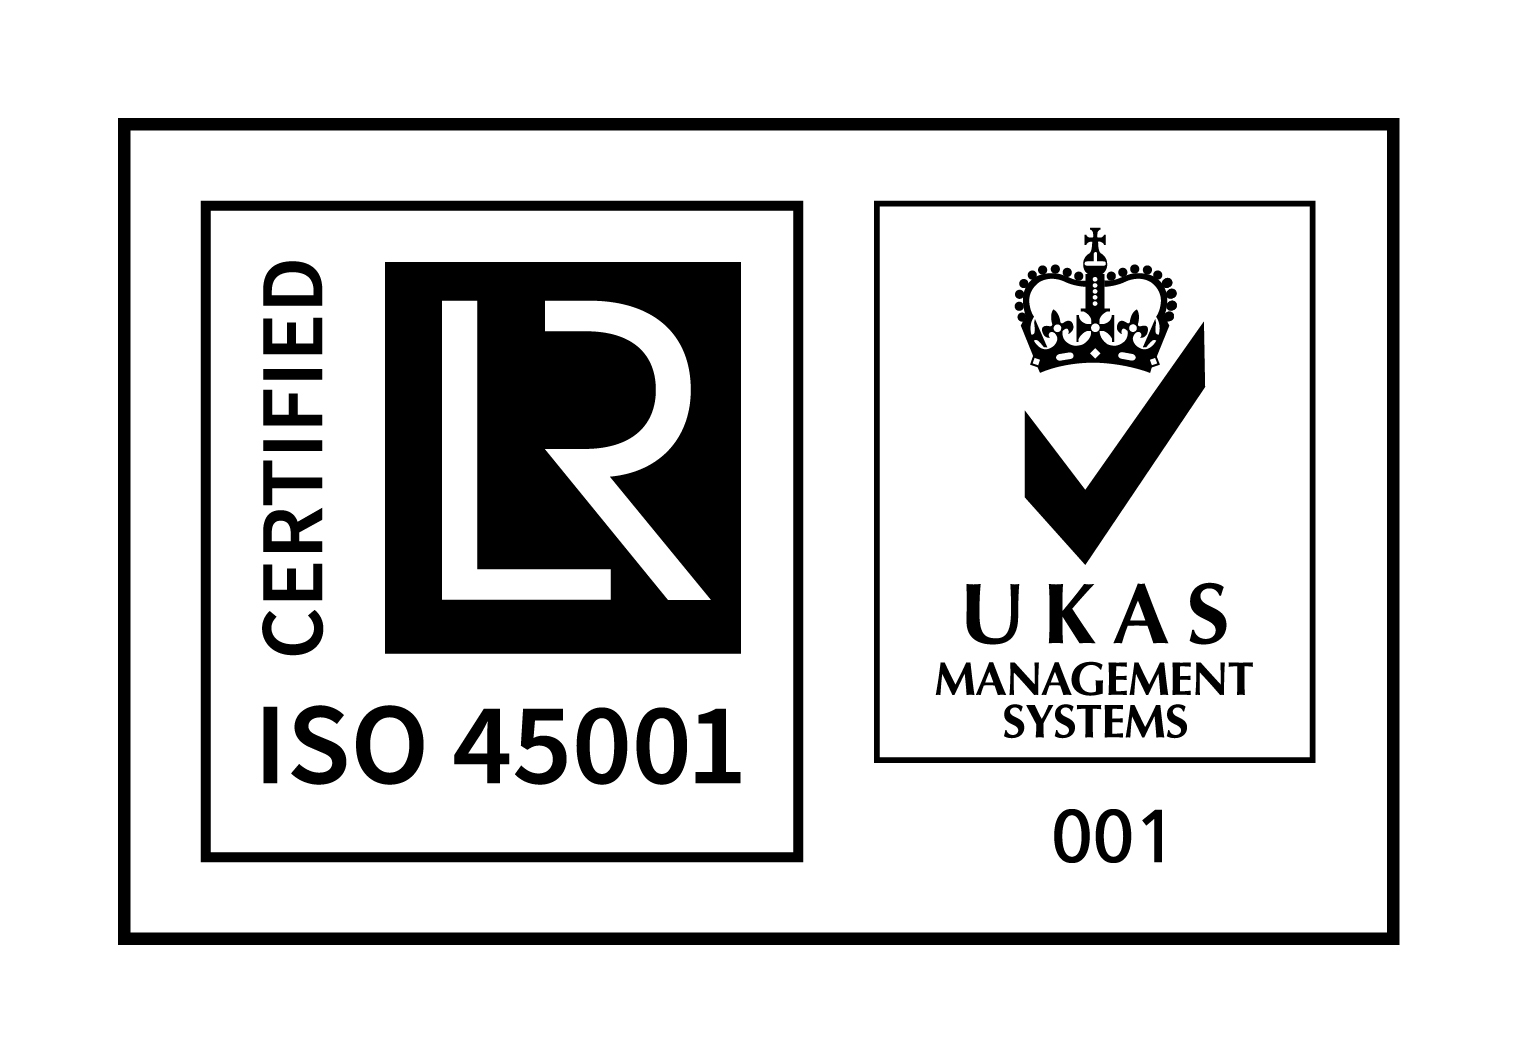 UKAS Management Systems - ISO 45001